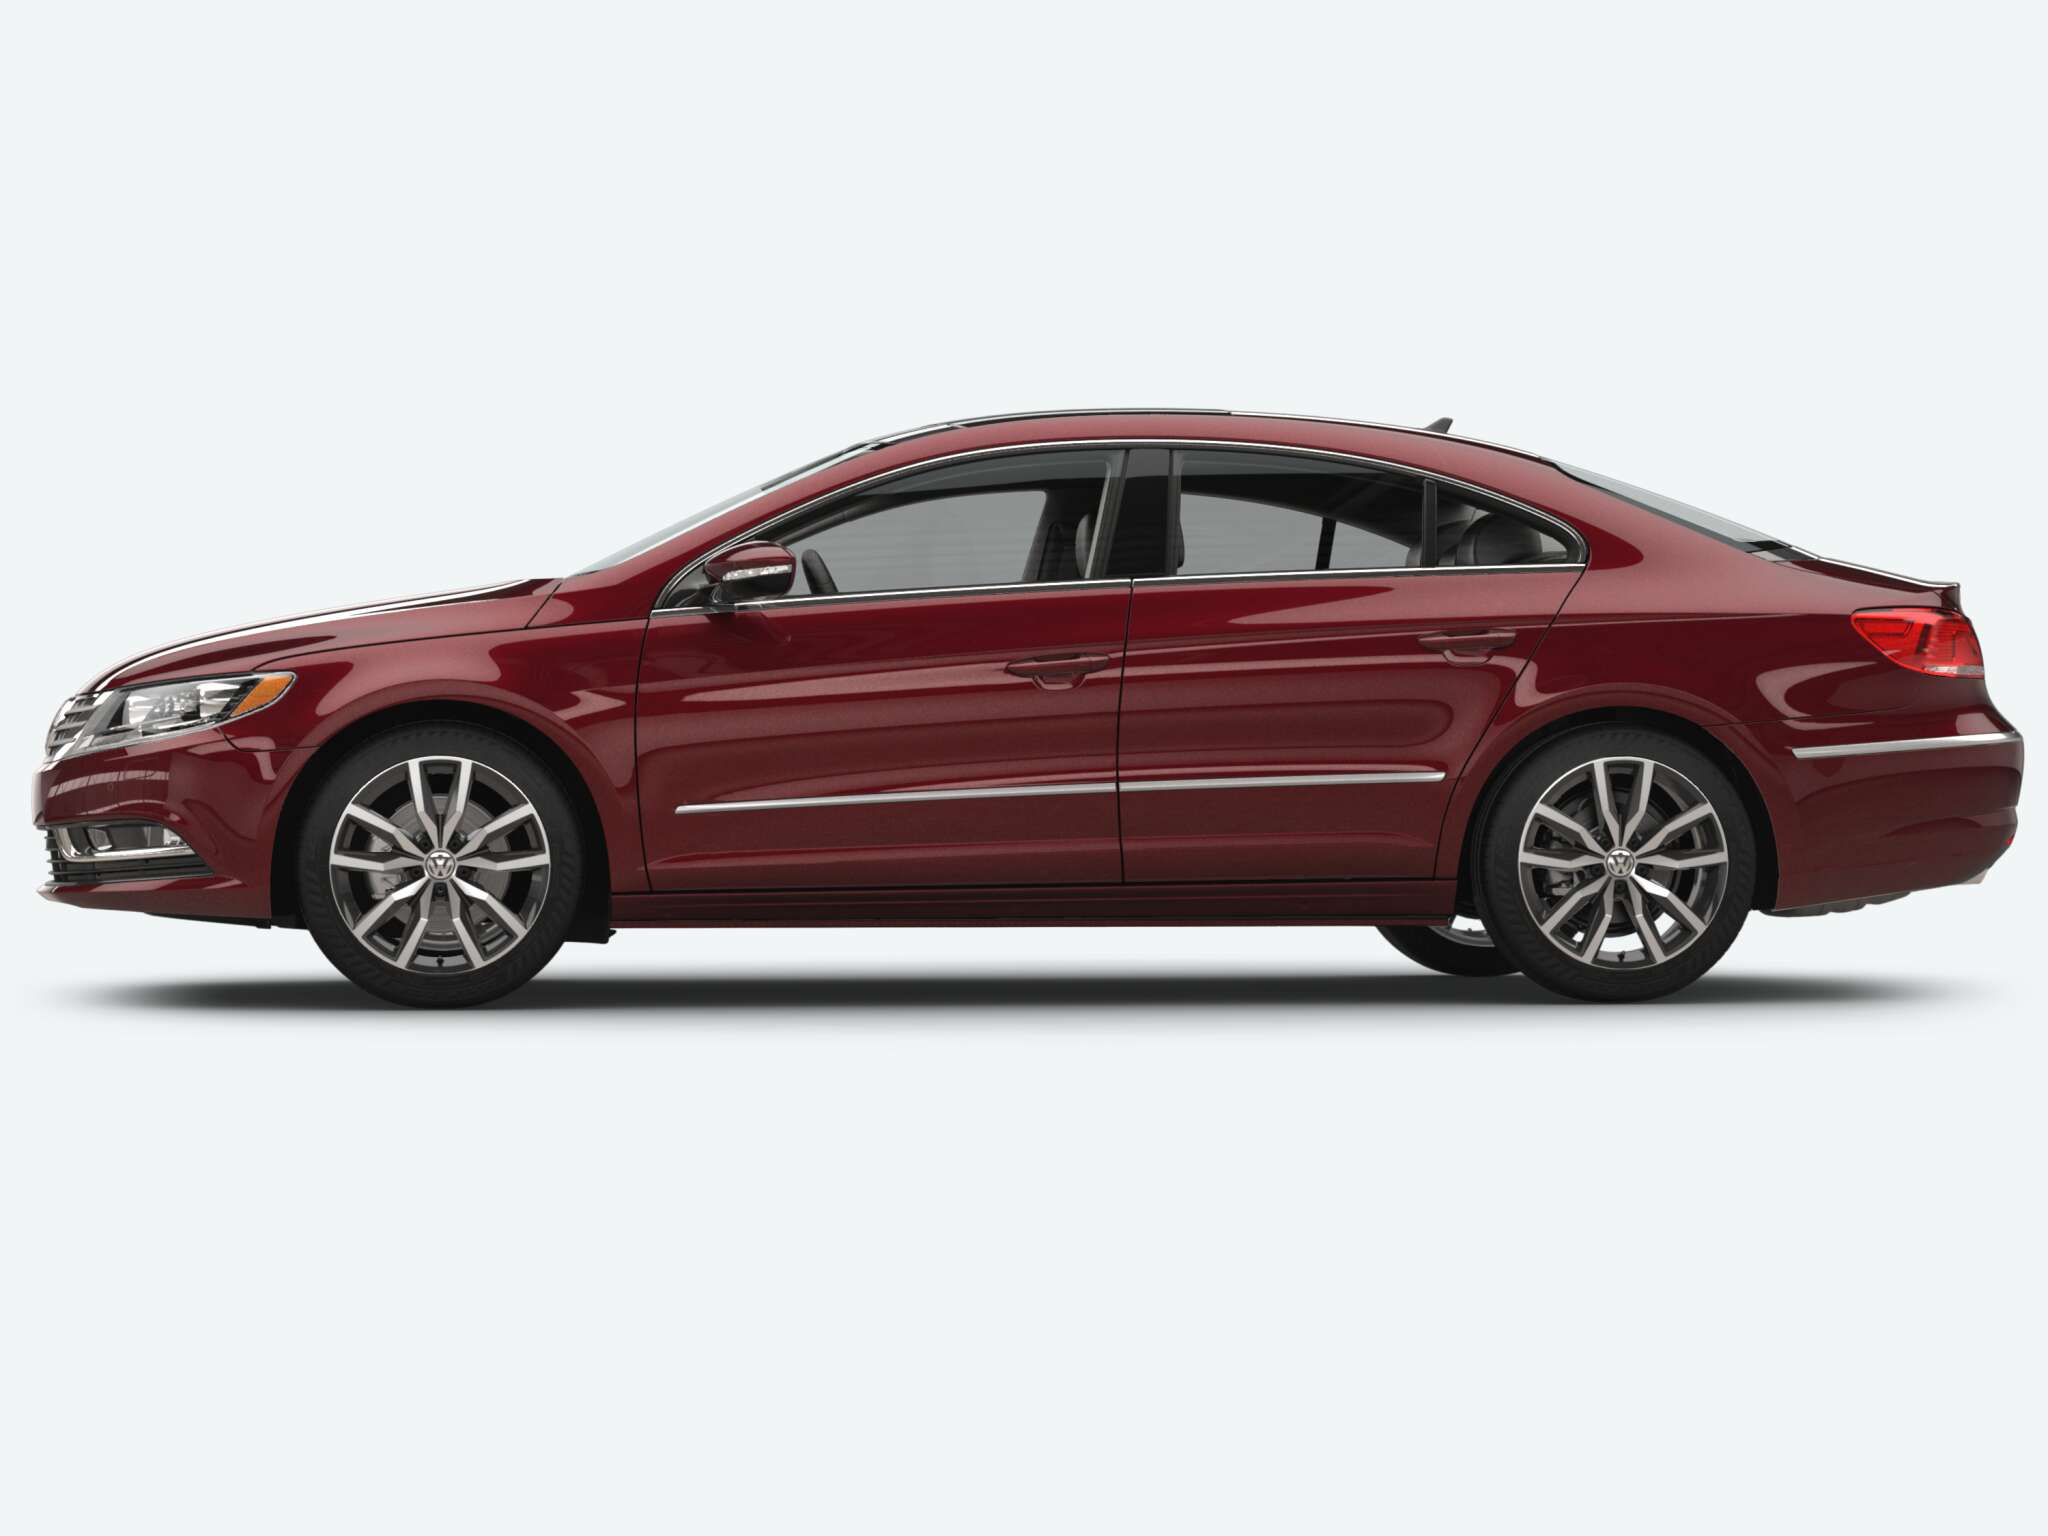 Volkswagen CC V6 Executive 4MOTION side view